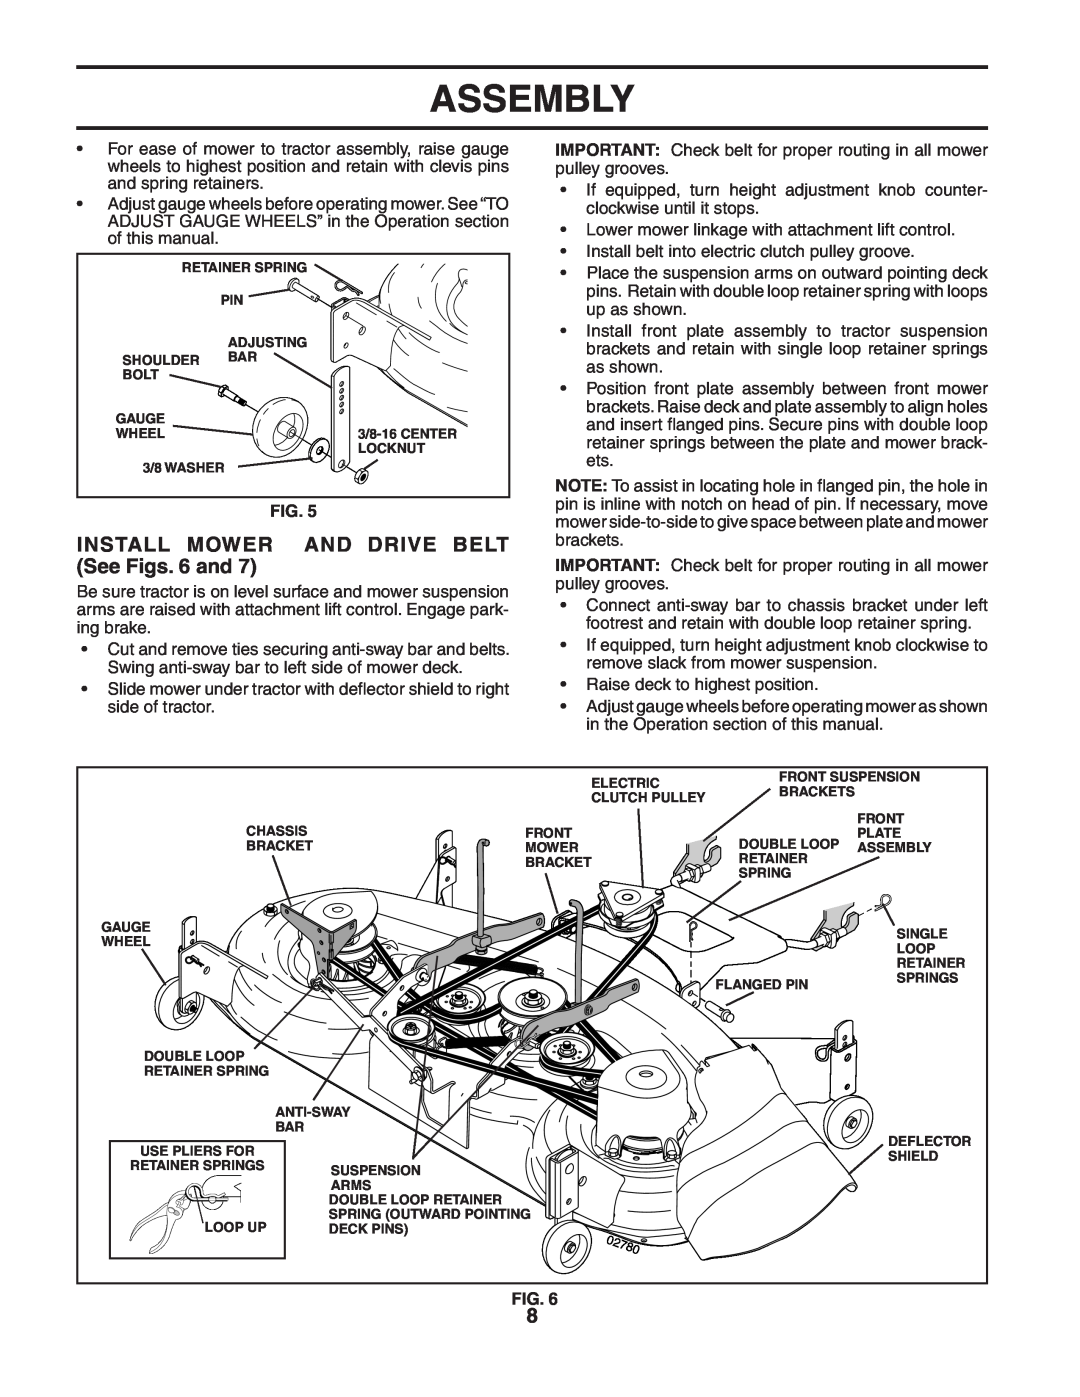 Husqvarna YTH2548 owner manual INSTALL MOWER AND DRIVE BELT See Figs. 6 and, Assembly 